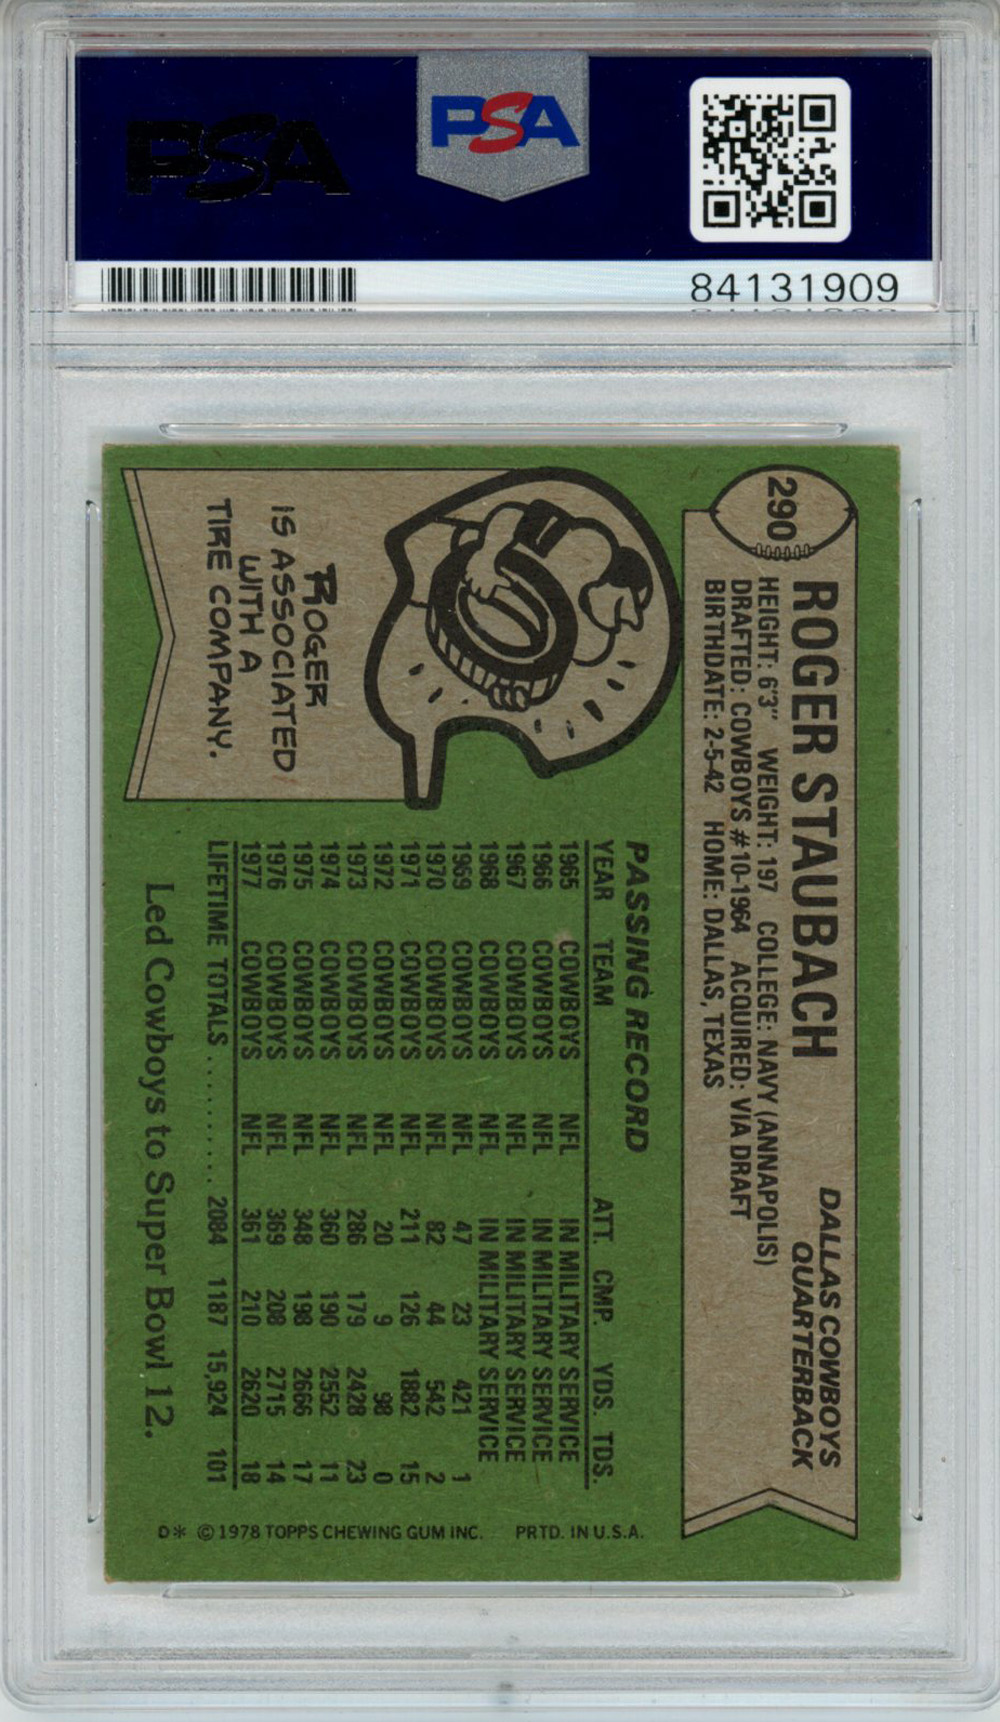 Roger Staubach Autographed 1978 Topps #290 Trading Card PSA Slab